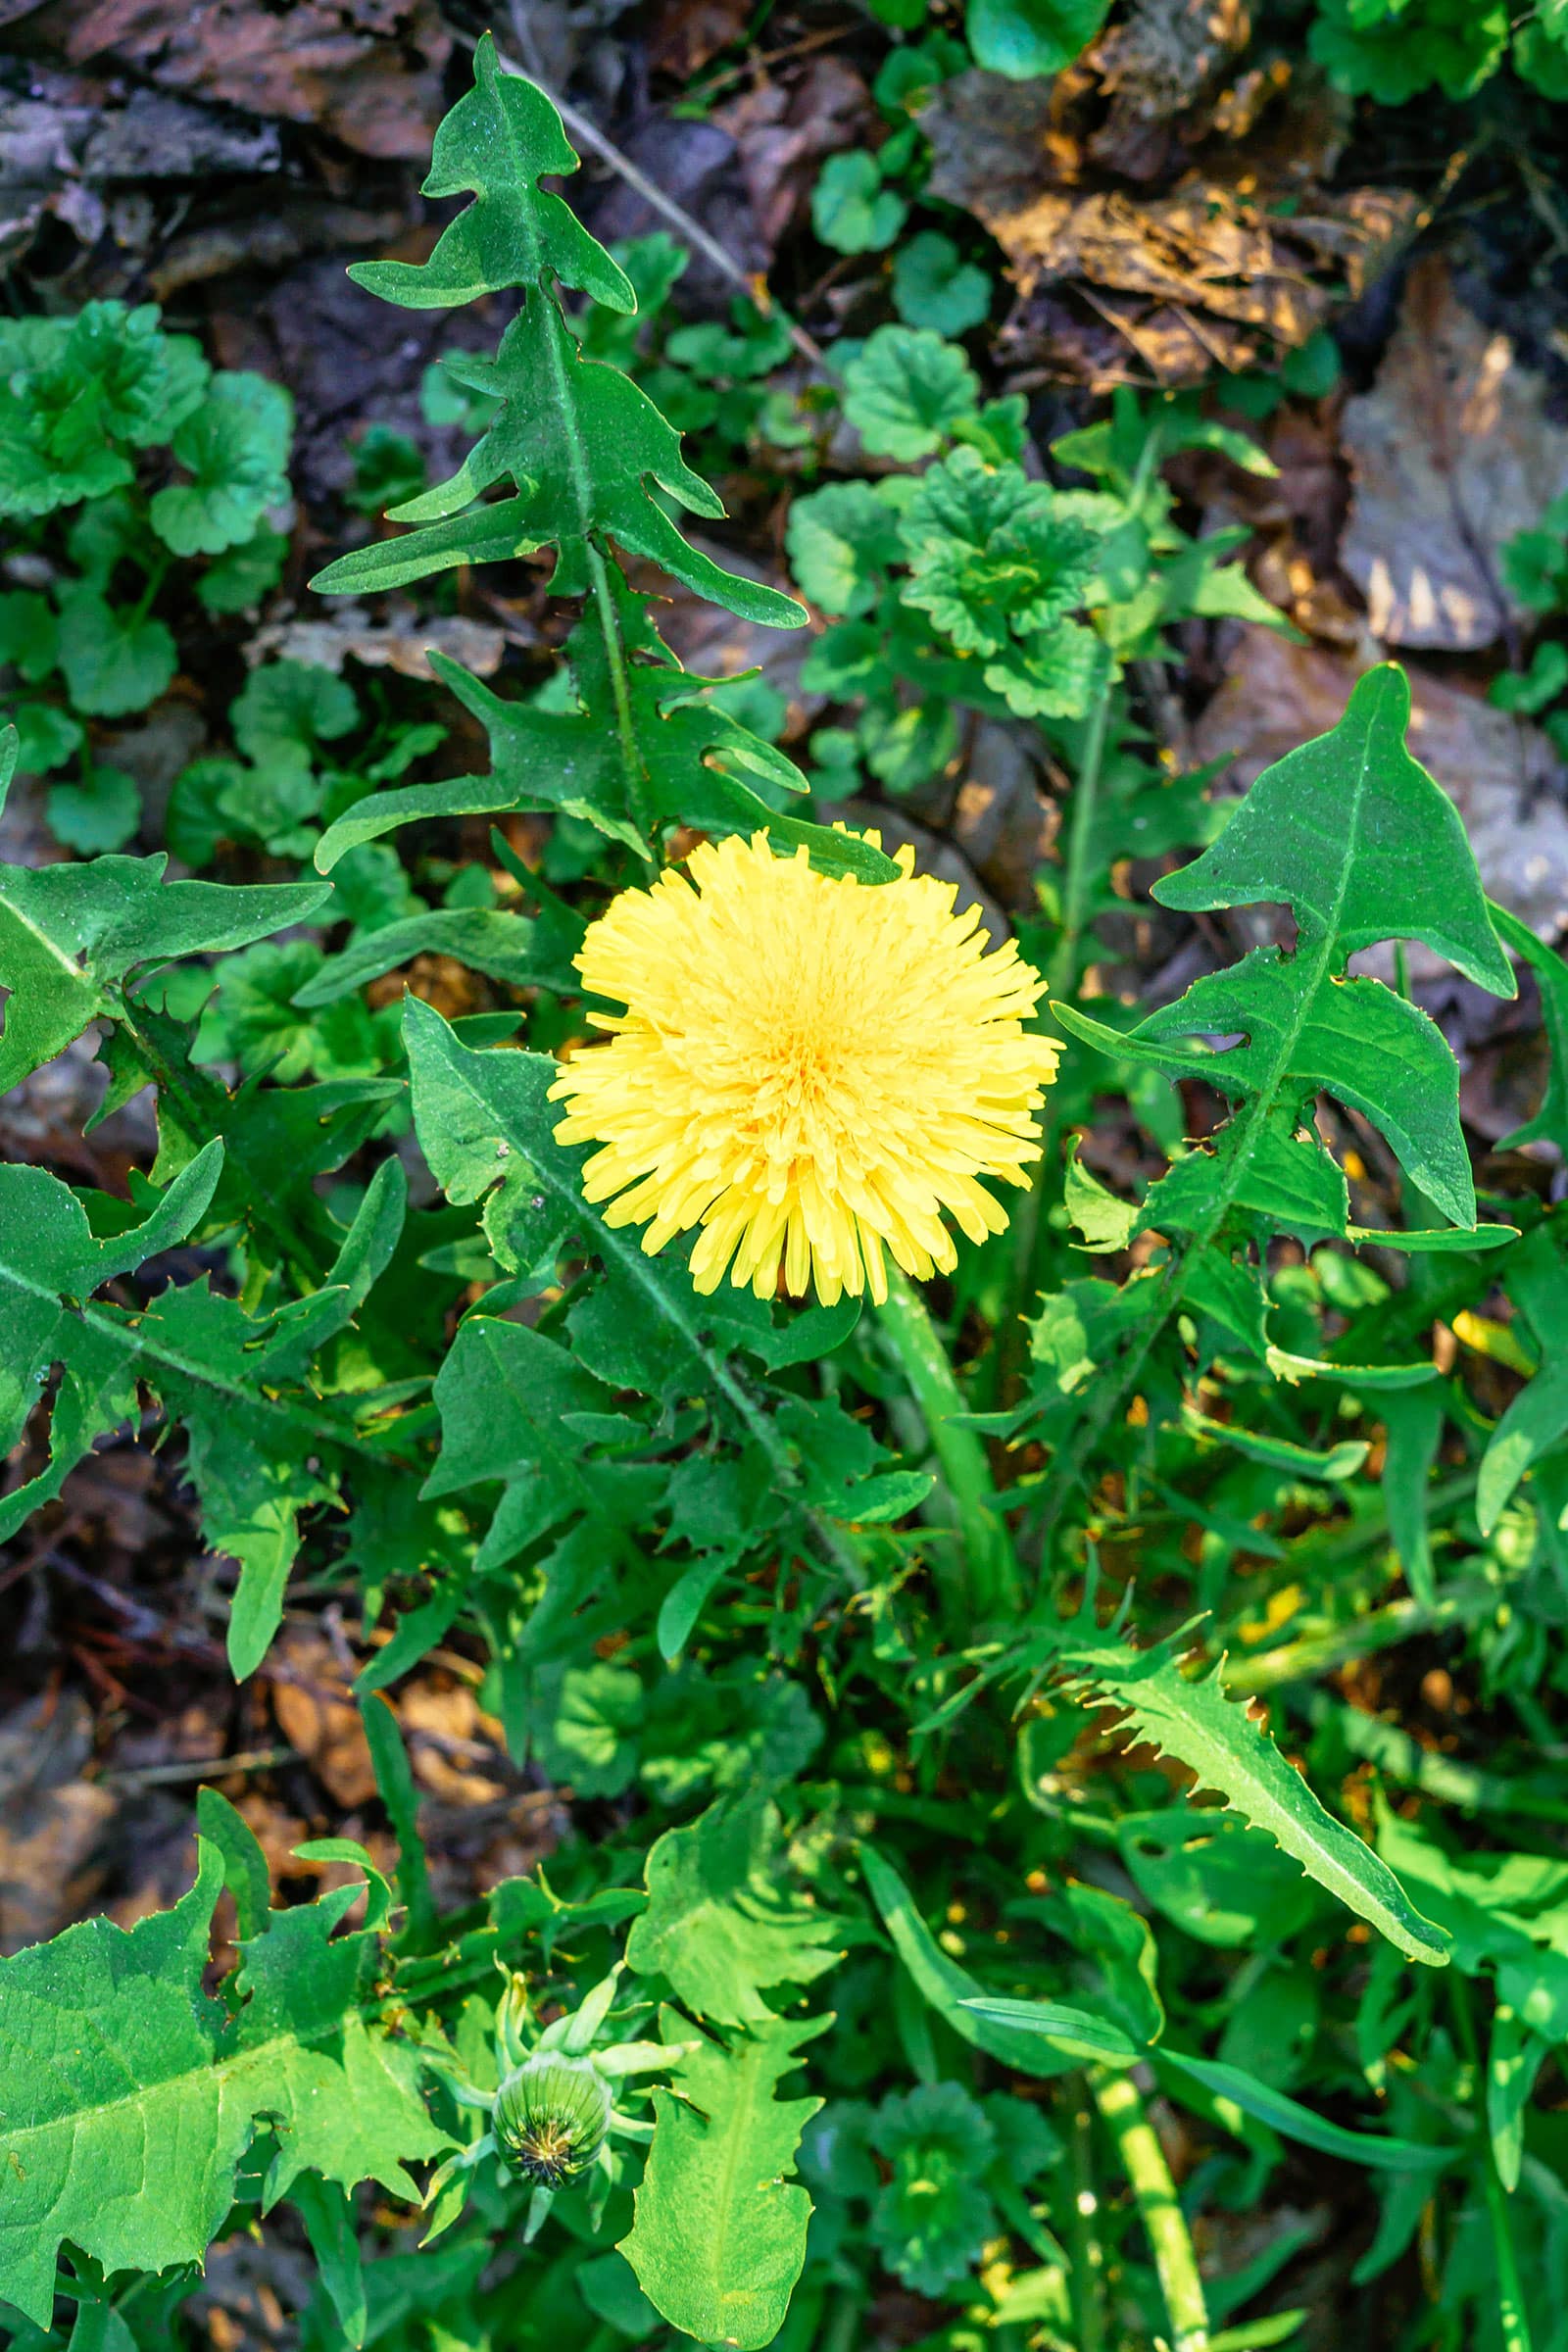 Dandelion with yellow flower